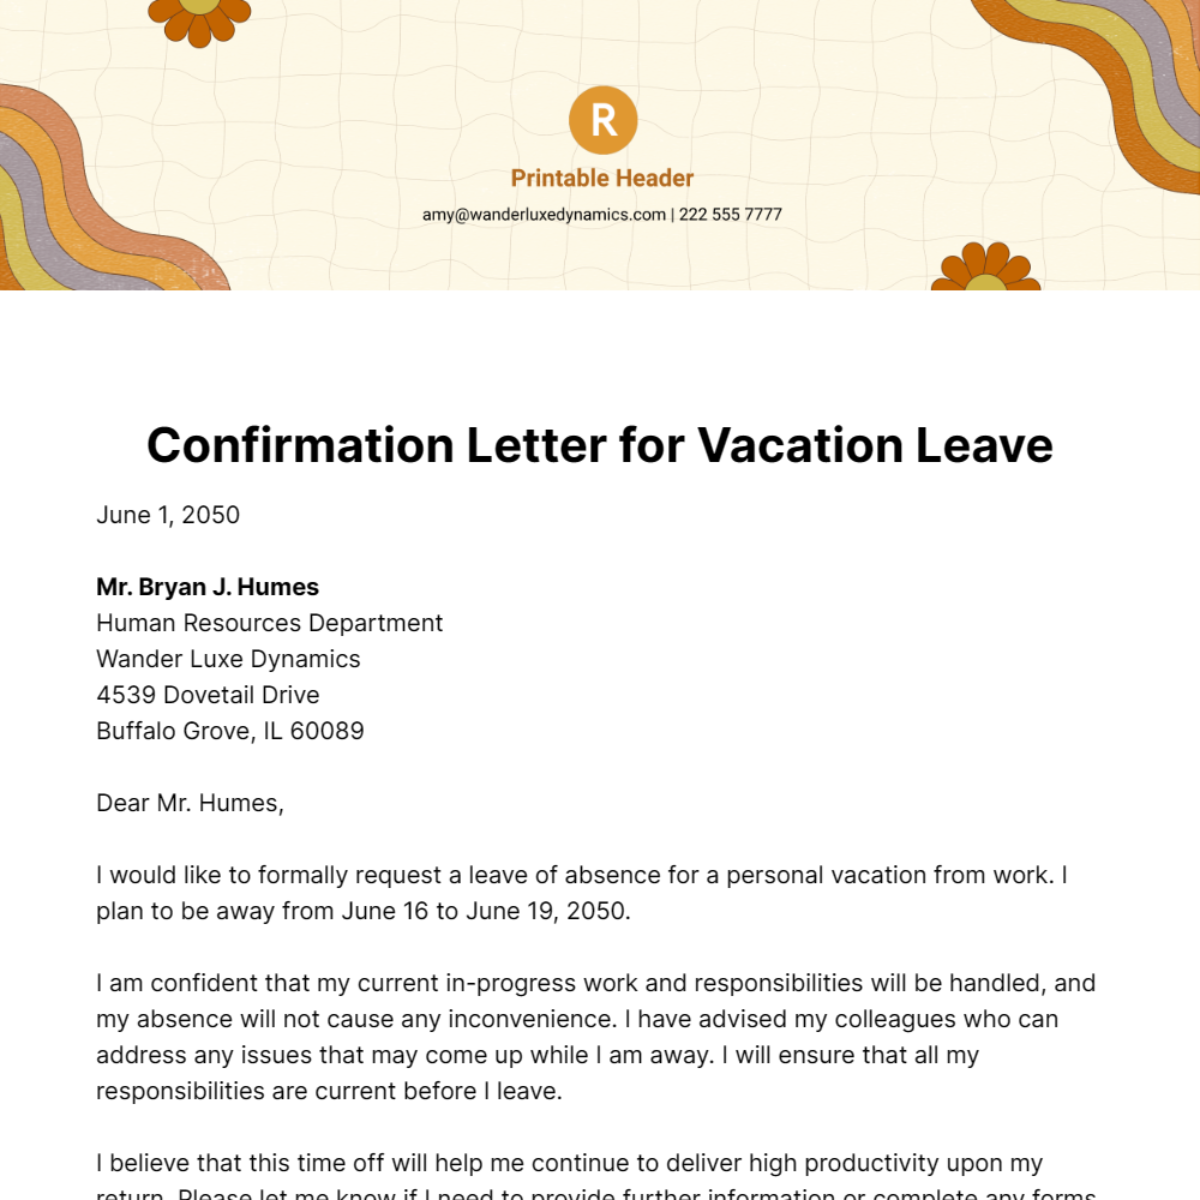 Confirmation Letter for Vacation Leave Template